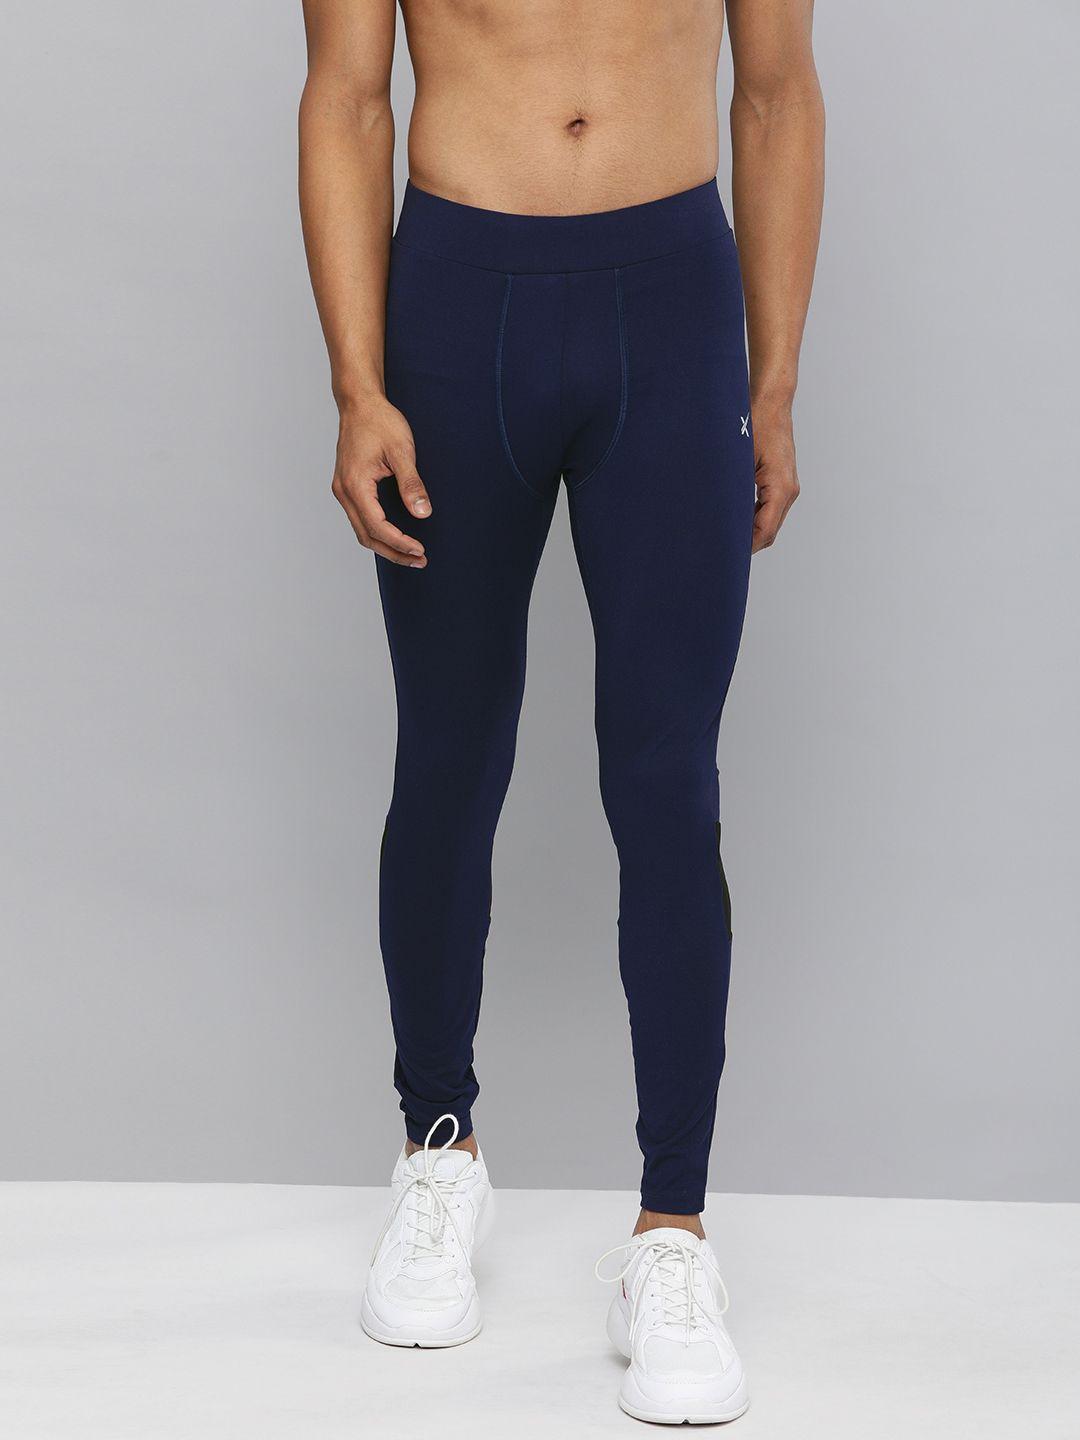 hrx by hrithik roshan men navy blue solid rapid-dry antimicrobial running tights